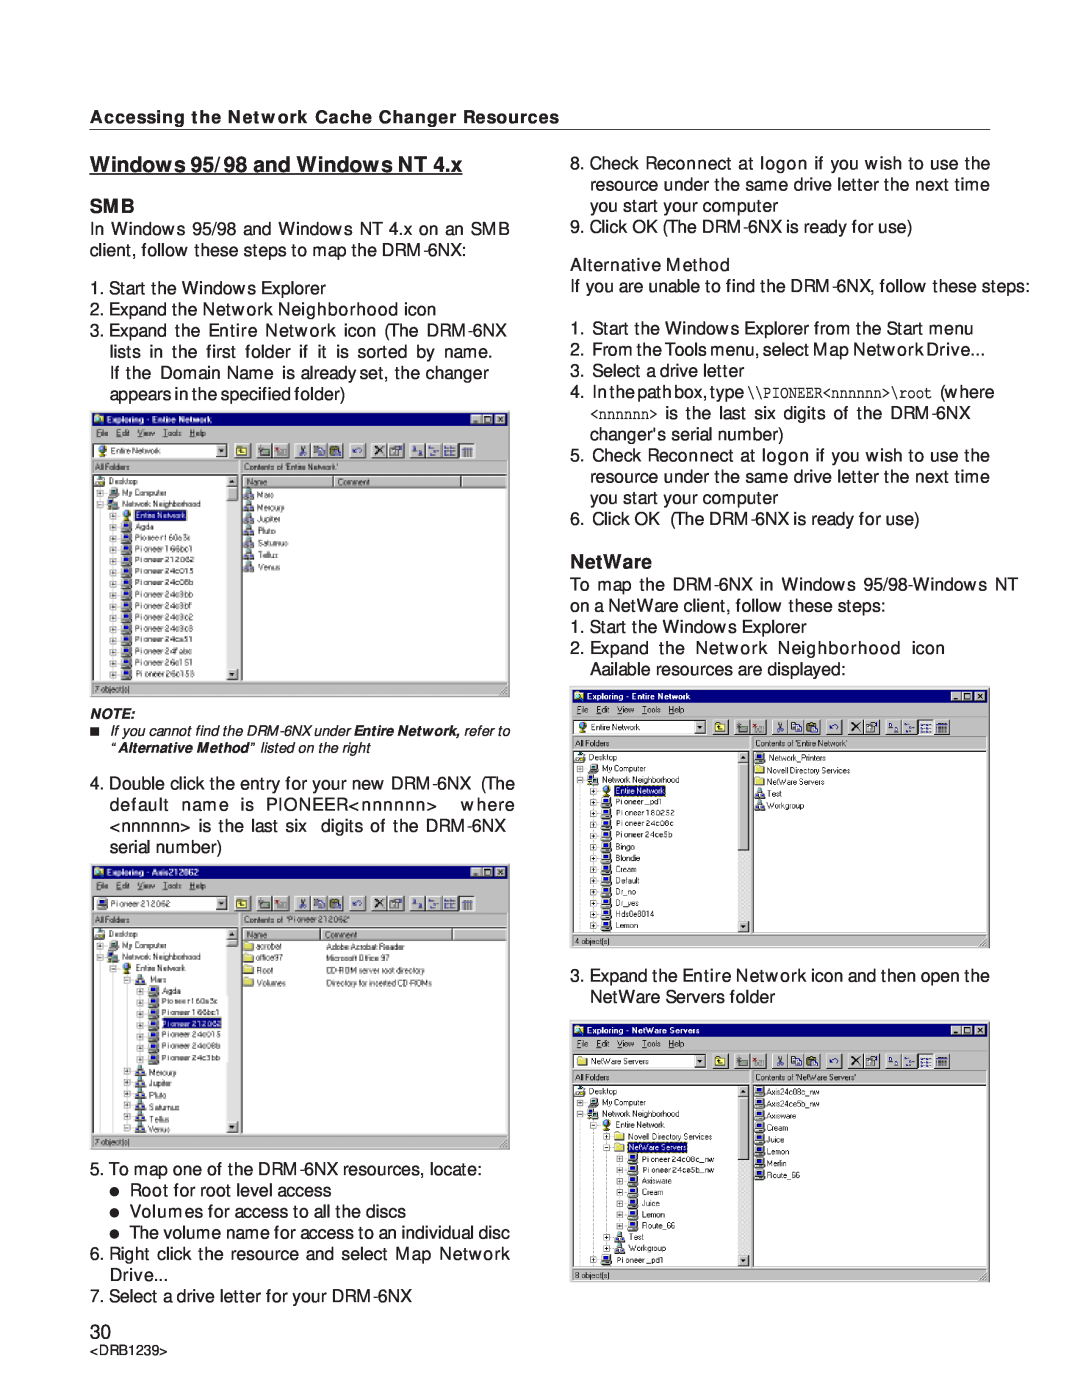 Pioneer DRM-6NX manual Windows 95/98 and Windows NT, NetWare, Accessing the Network Cache Changer Resources 